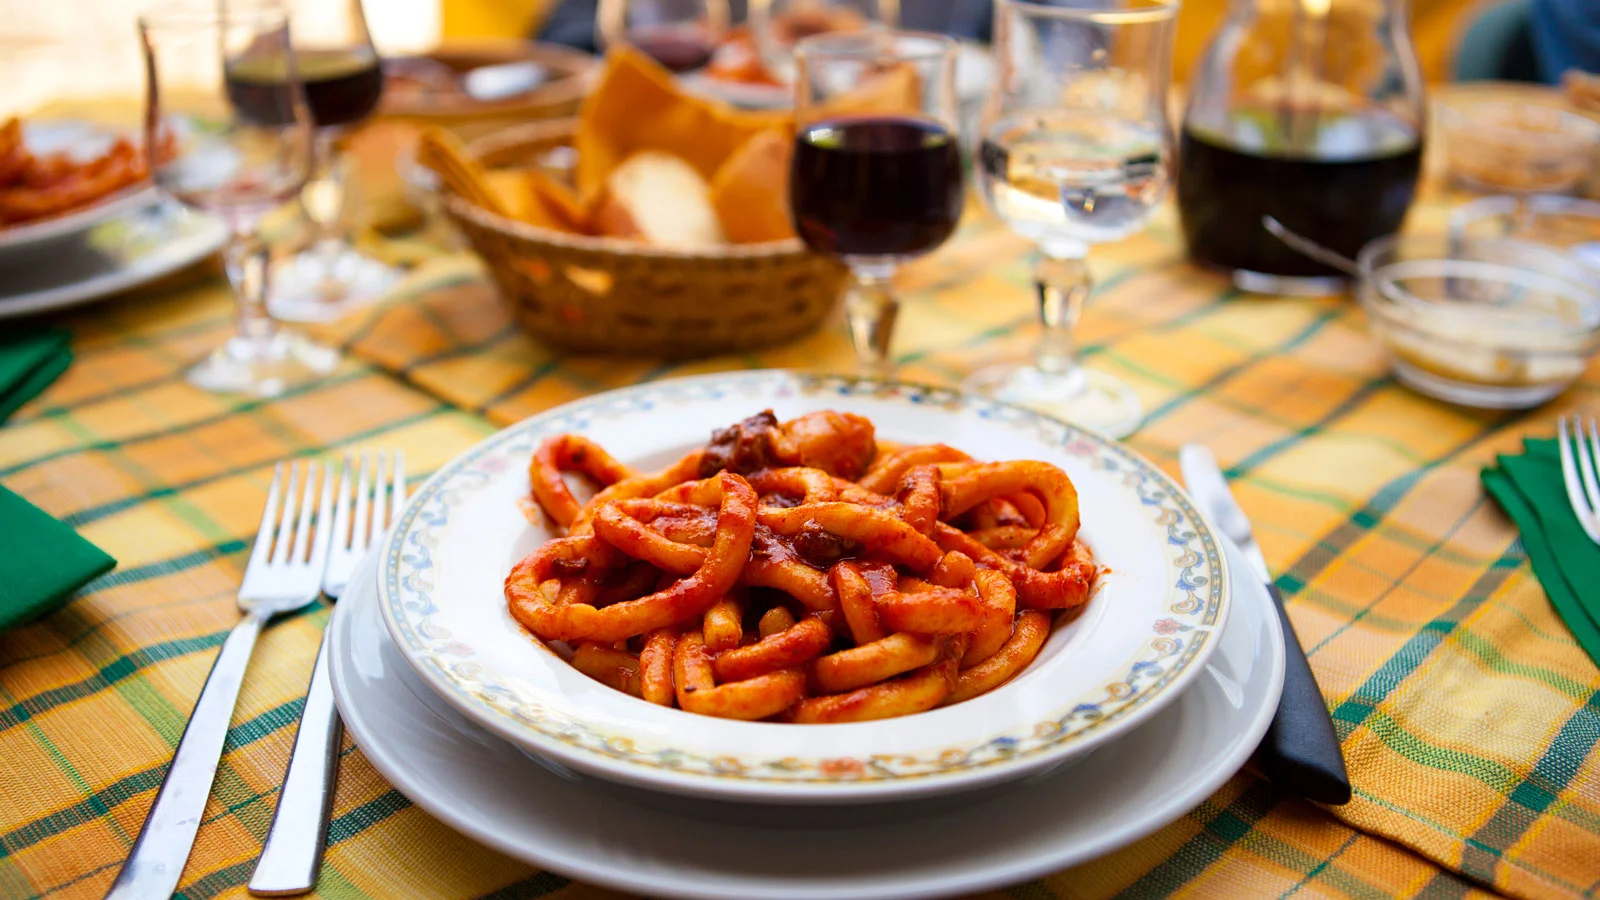 sicily table with pasta and wine foodie